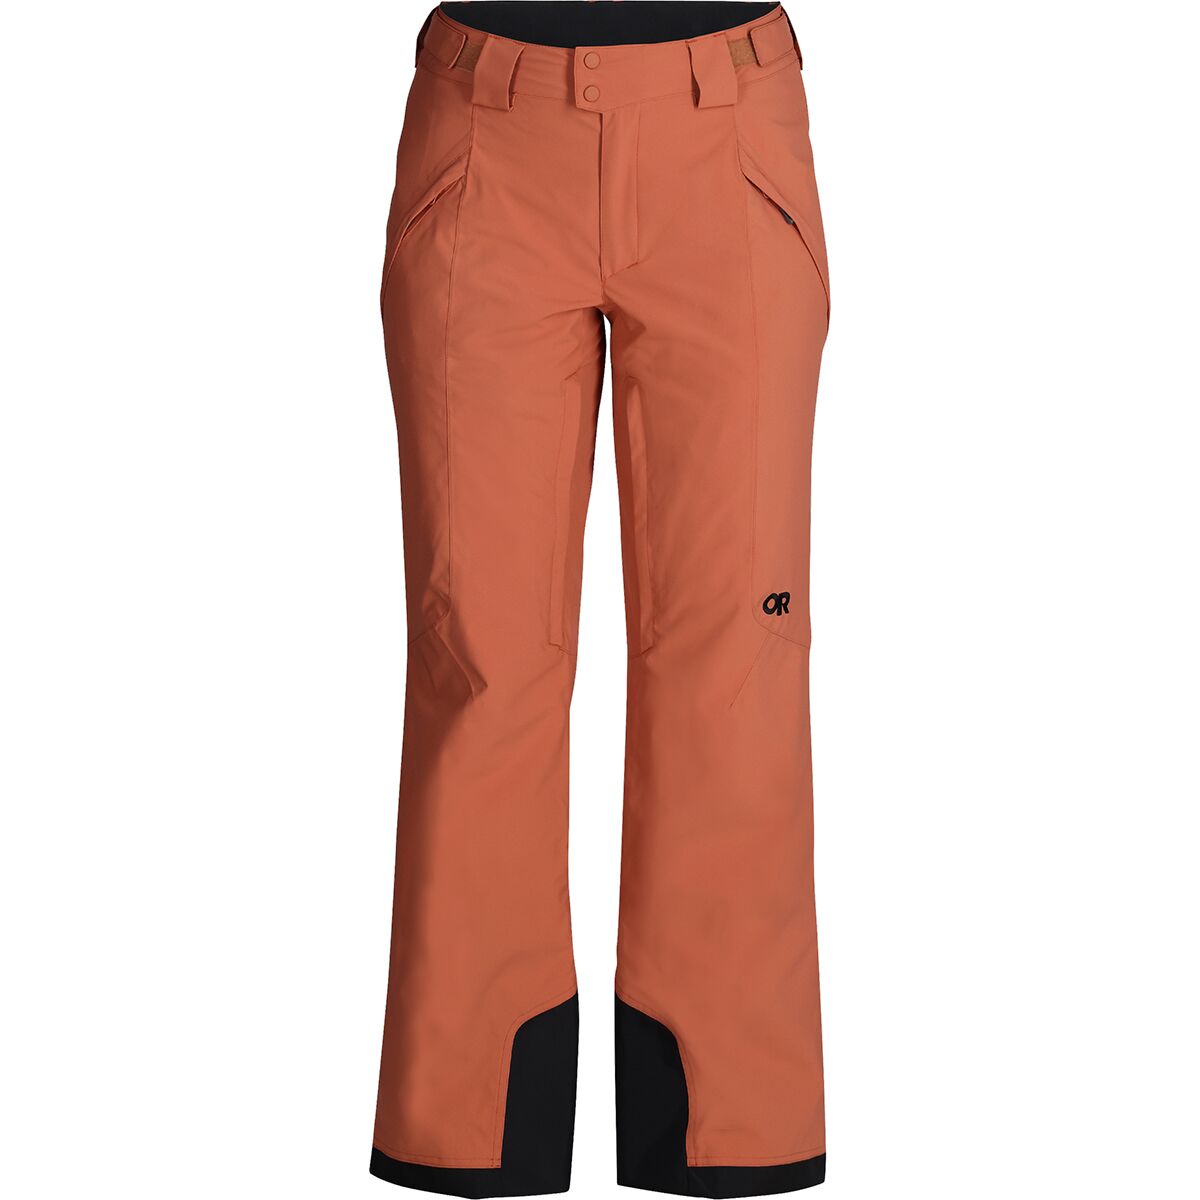 Outdoor Research Snowcrew Pant - Women's - Clothing | Backcountry